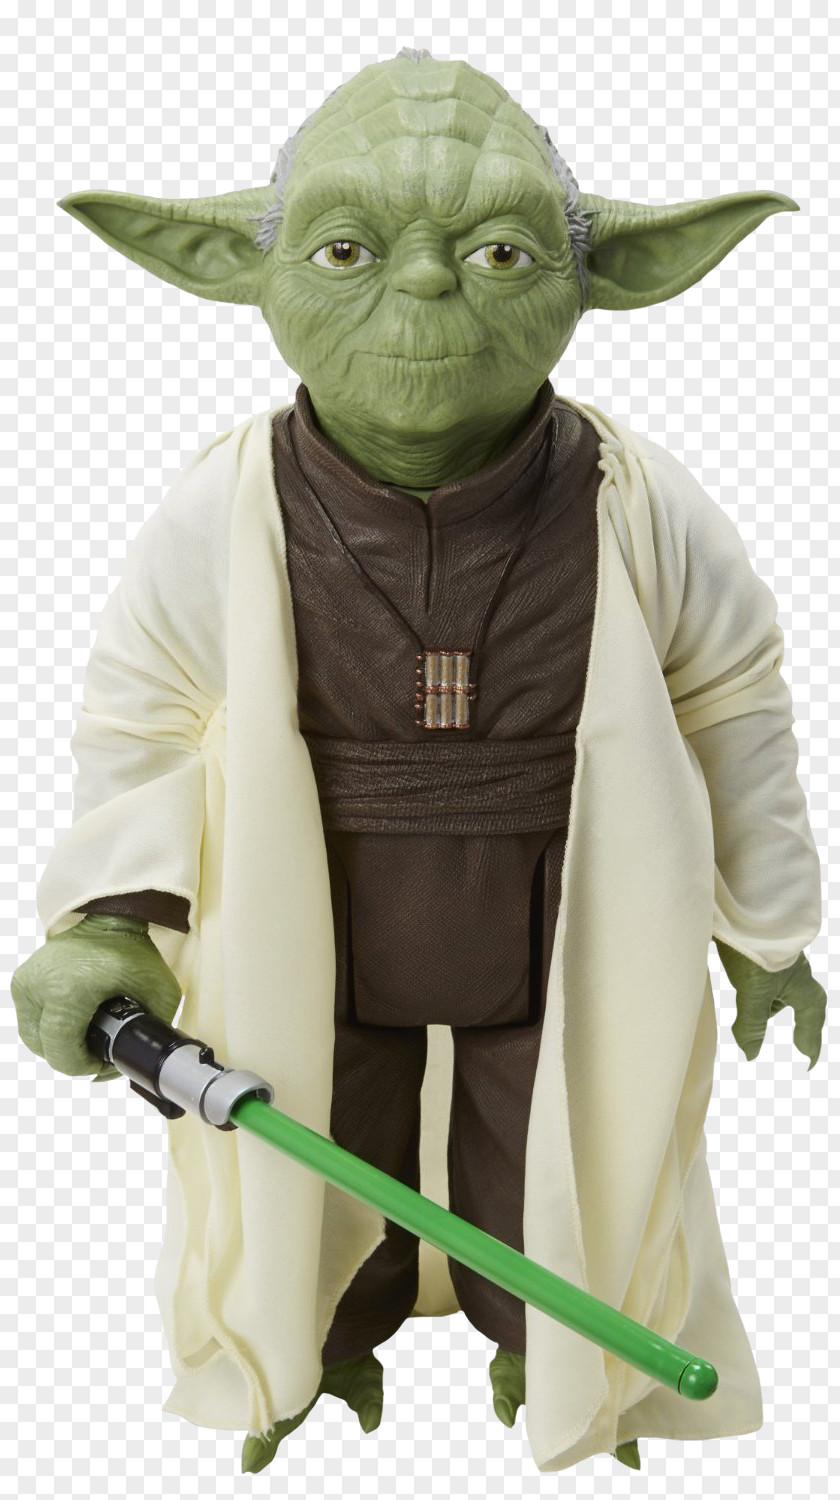 Action Figures Yoda Star Wars Jedi Lightsaber The Force PNG